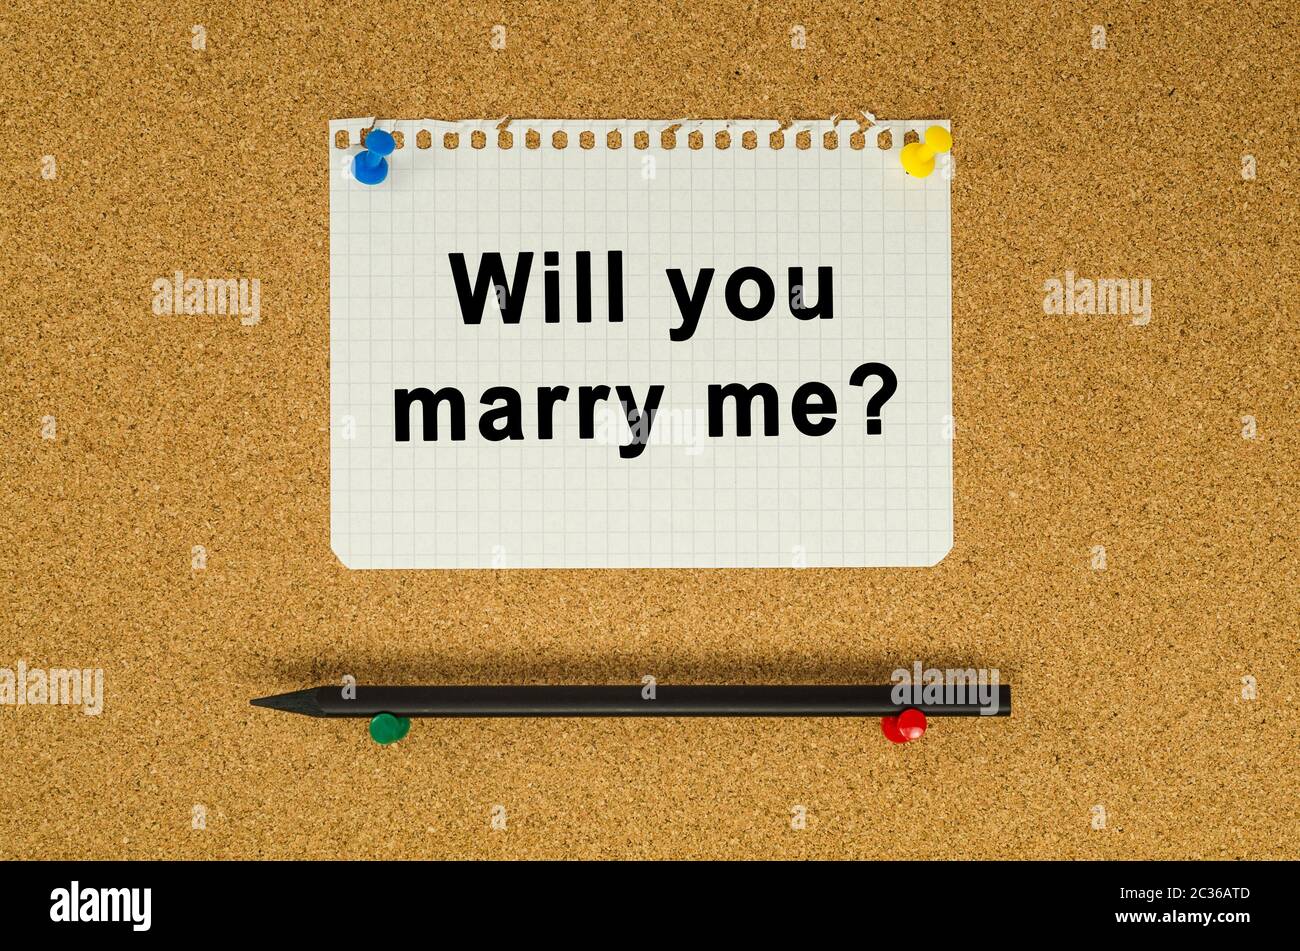 Will you marry me text note message pin on bulletin board Stock Photo